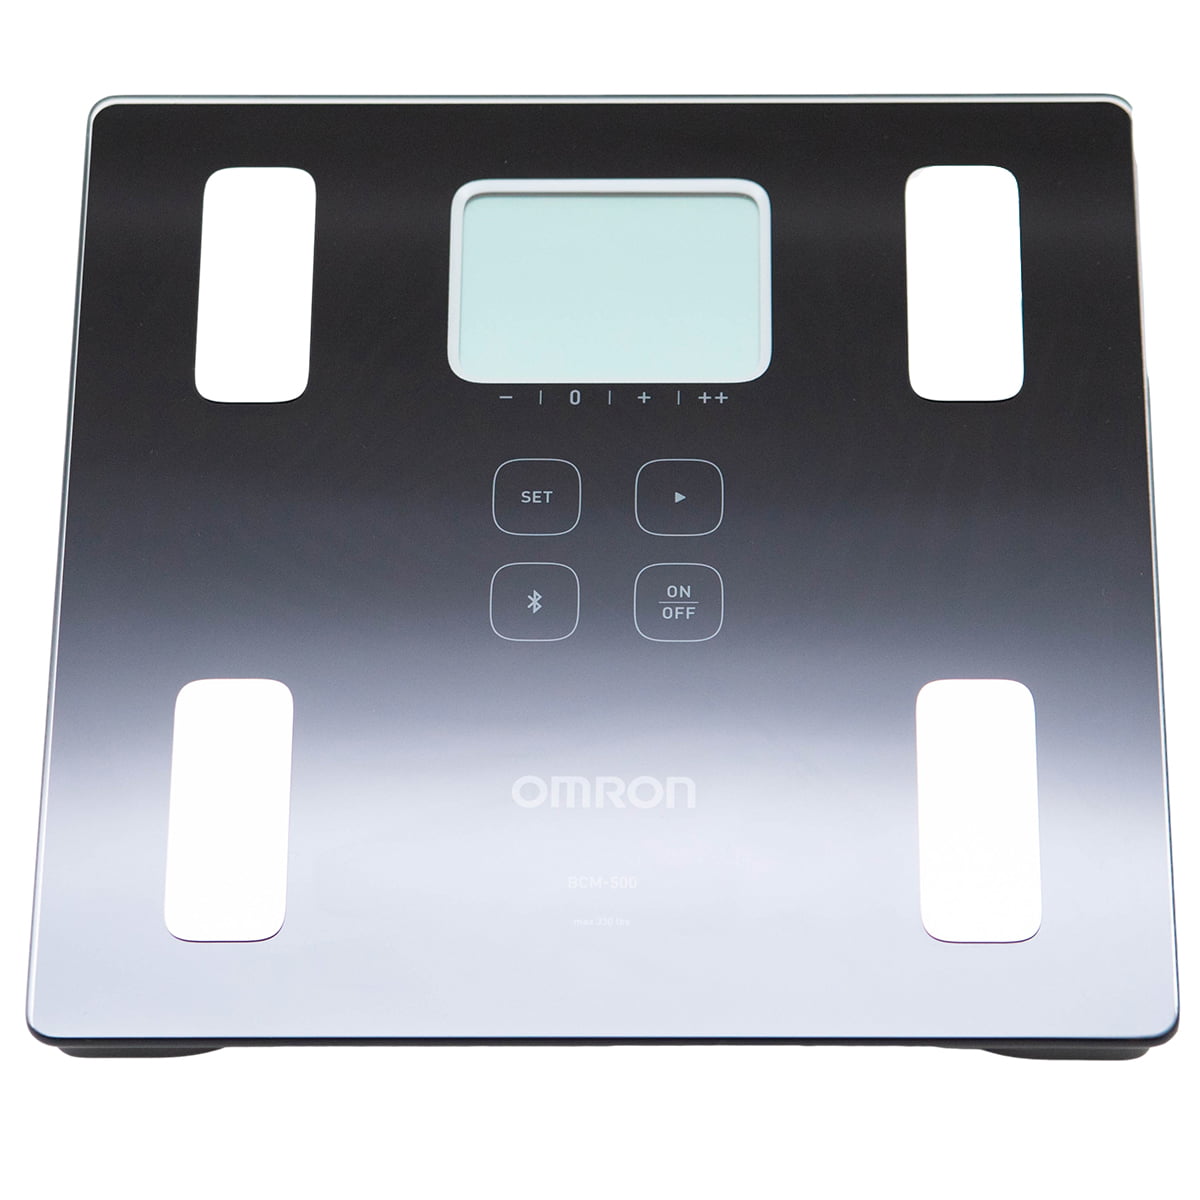 CAS Body Fat Analyzer Scale HBF 939 Quick & Easy Checking Just Step On 4 people 